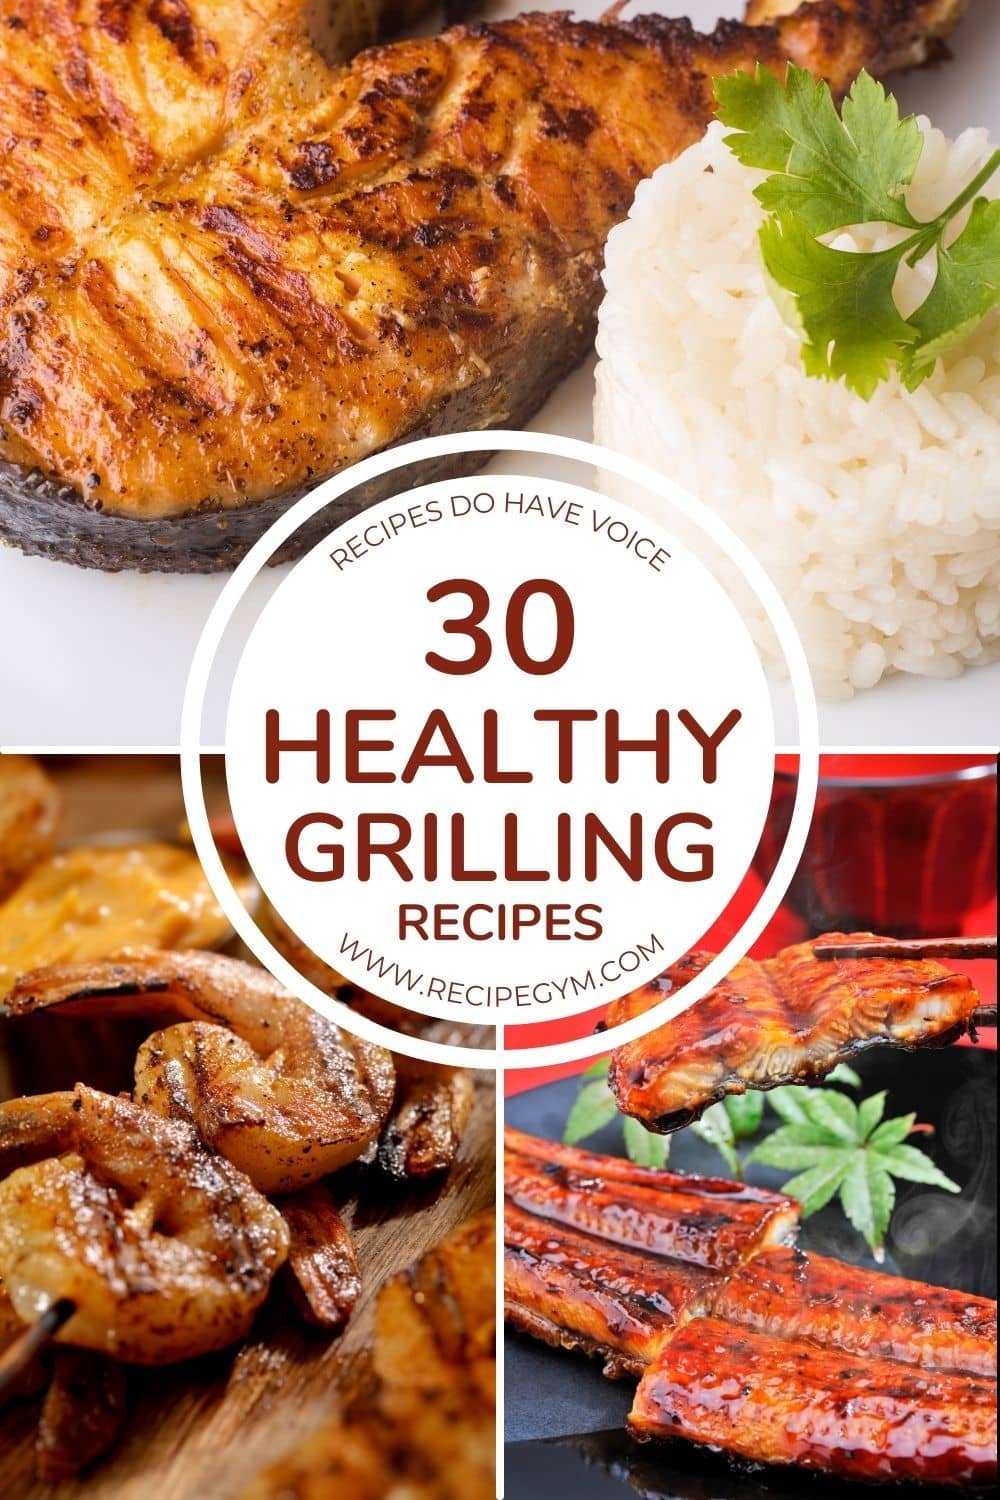 healthy grilling recipes
healthy bbq ideas
Healthy grilled chicken recipes